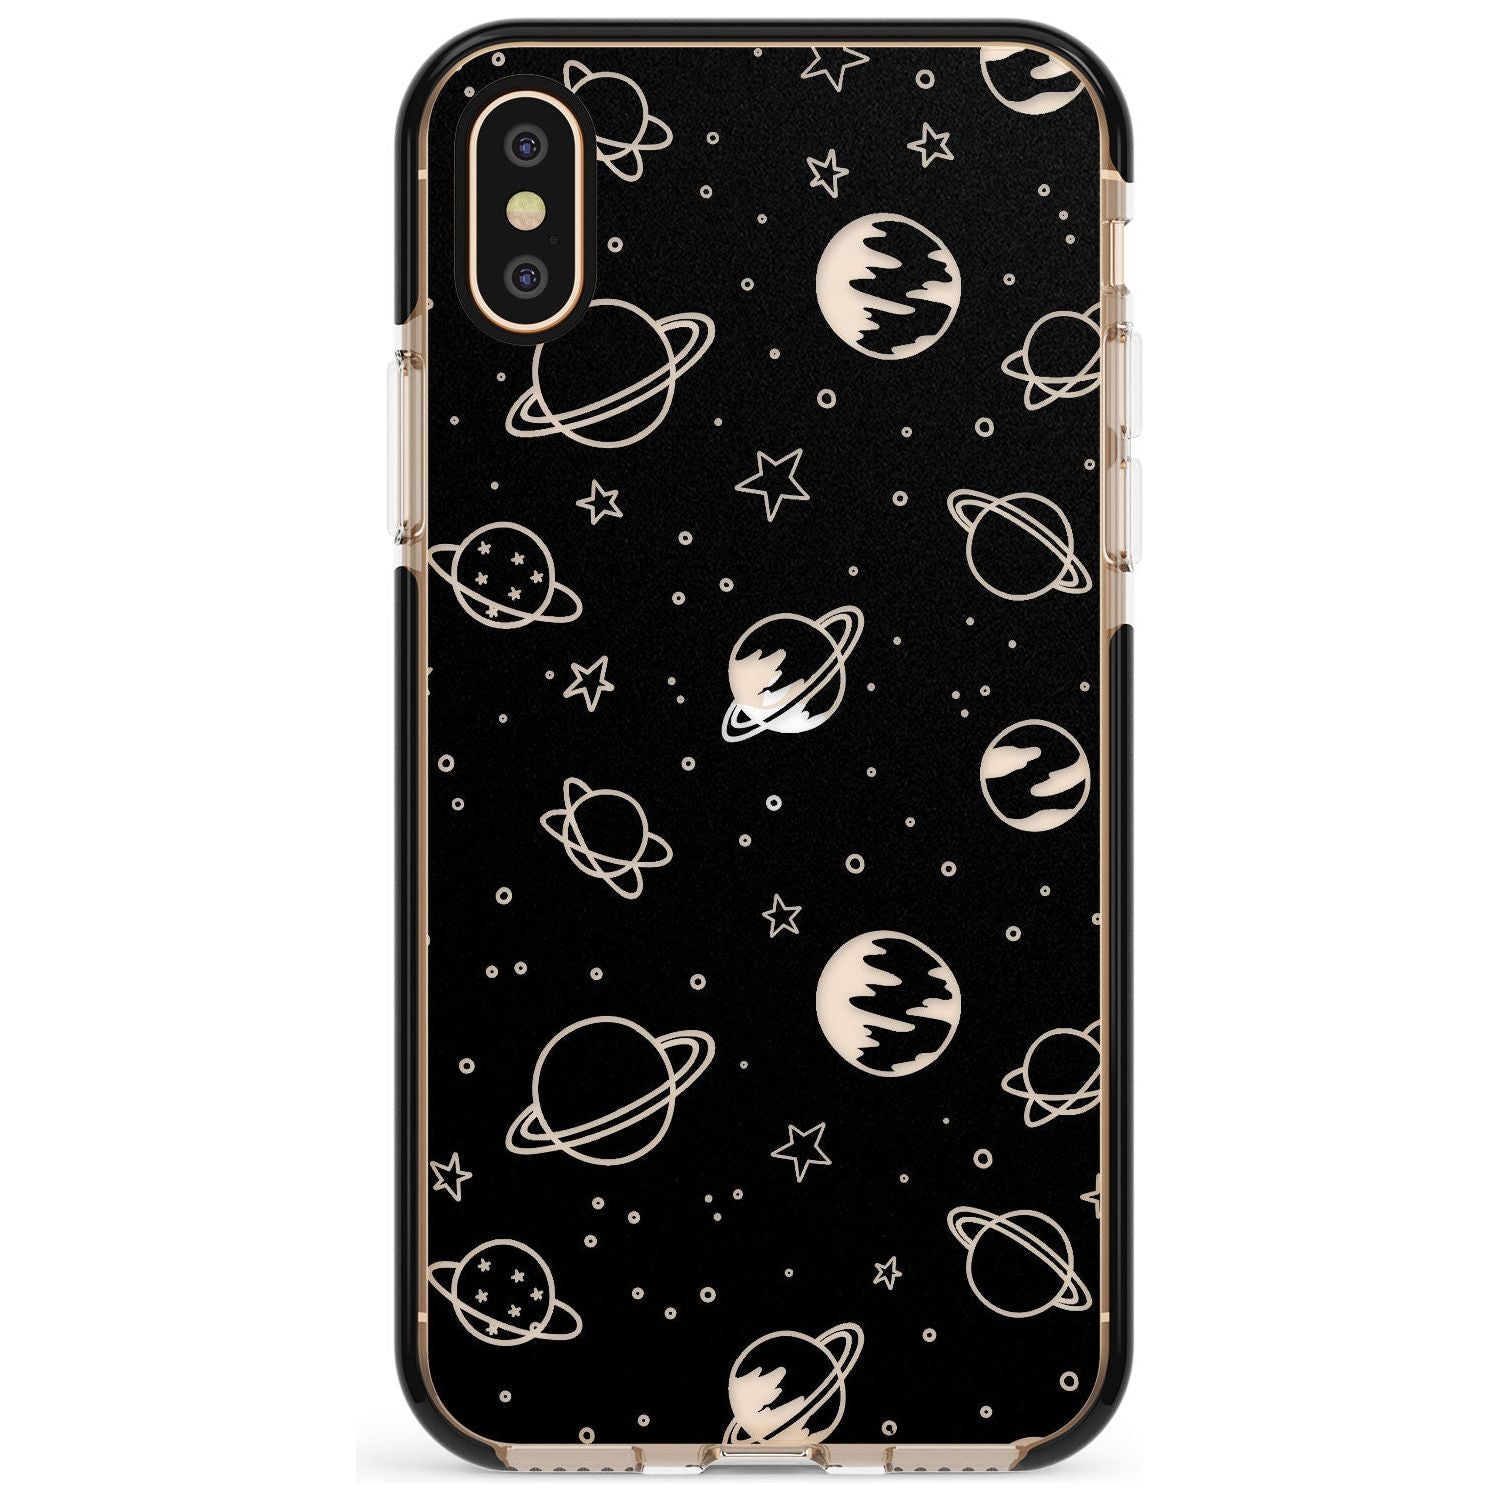 Outer Space Outlines: Clear on Black Pink Fade Impact Phone Case for iPhone X XS Max XR